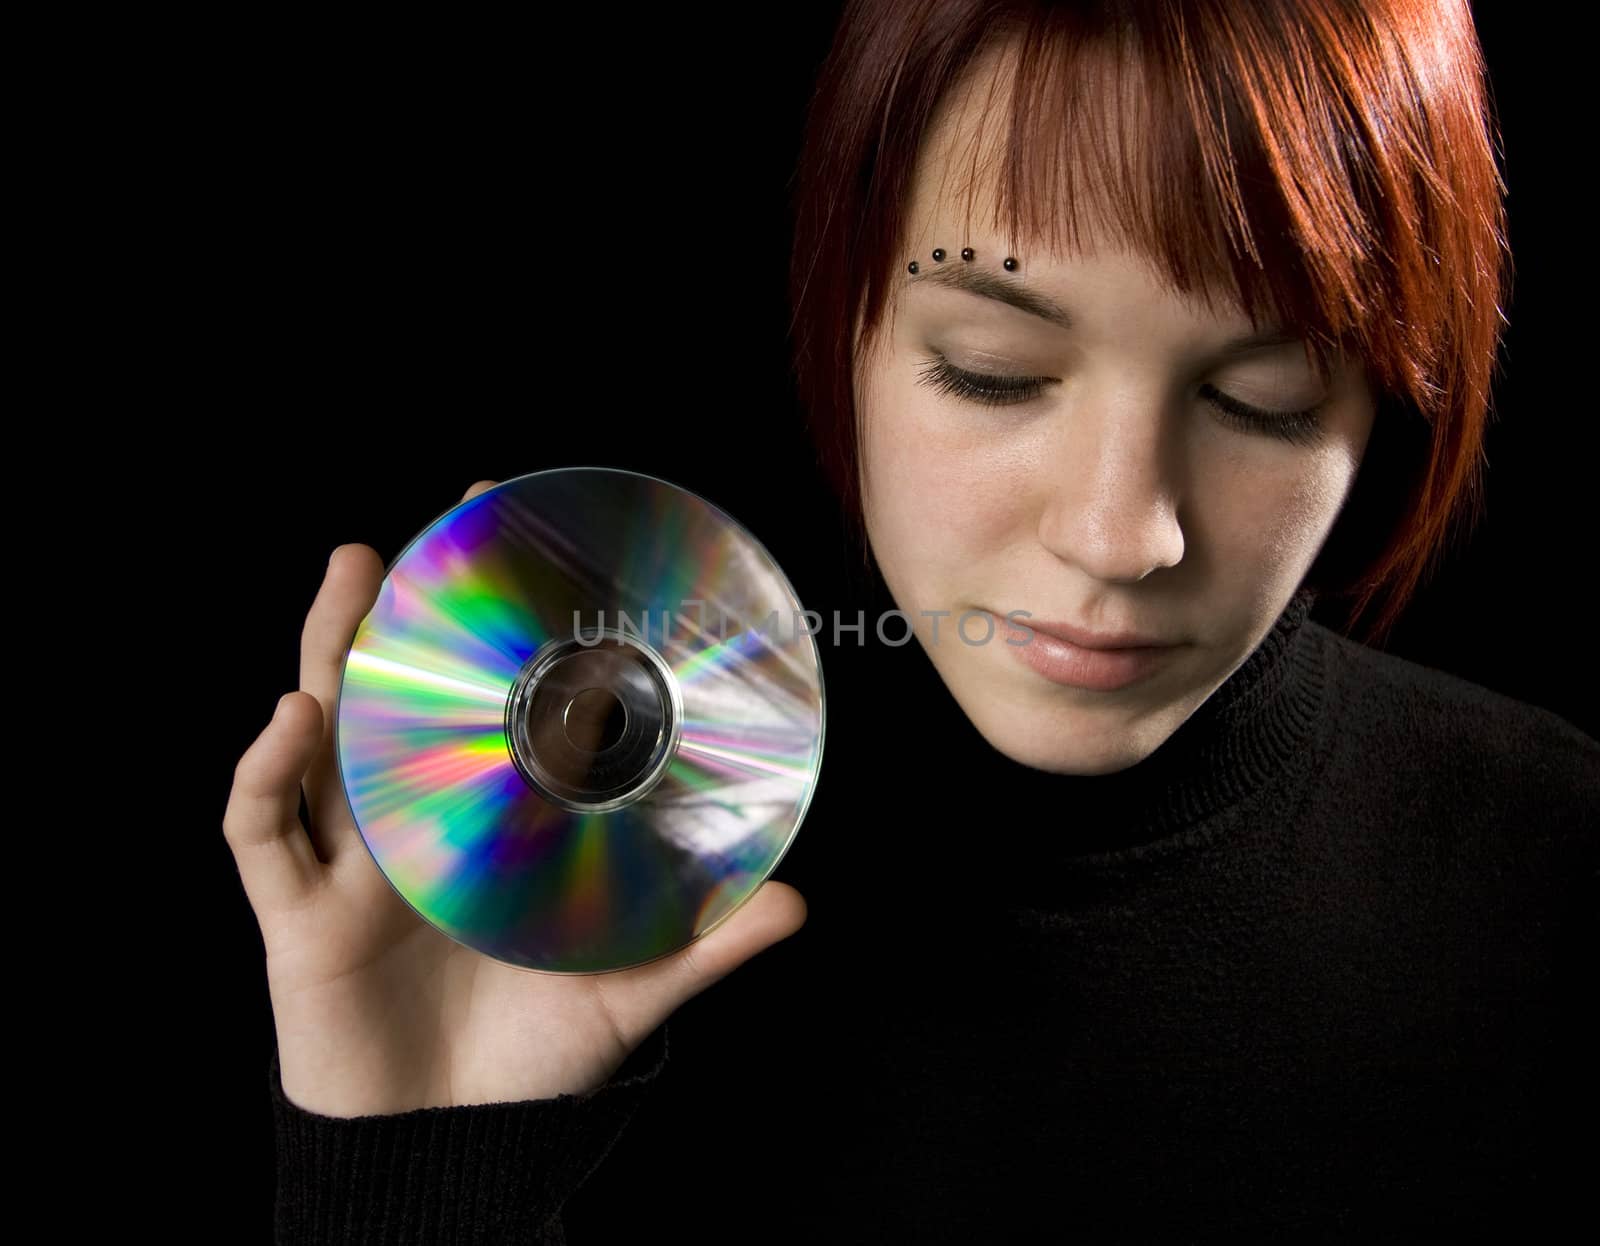 Redhead girl holding a compact disc. Lit with studio lighting, hair light and two umbrelled strobes.